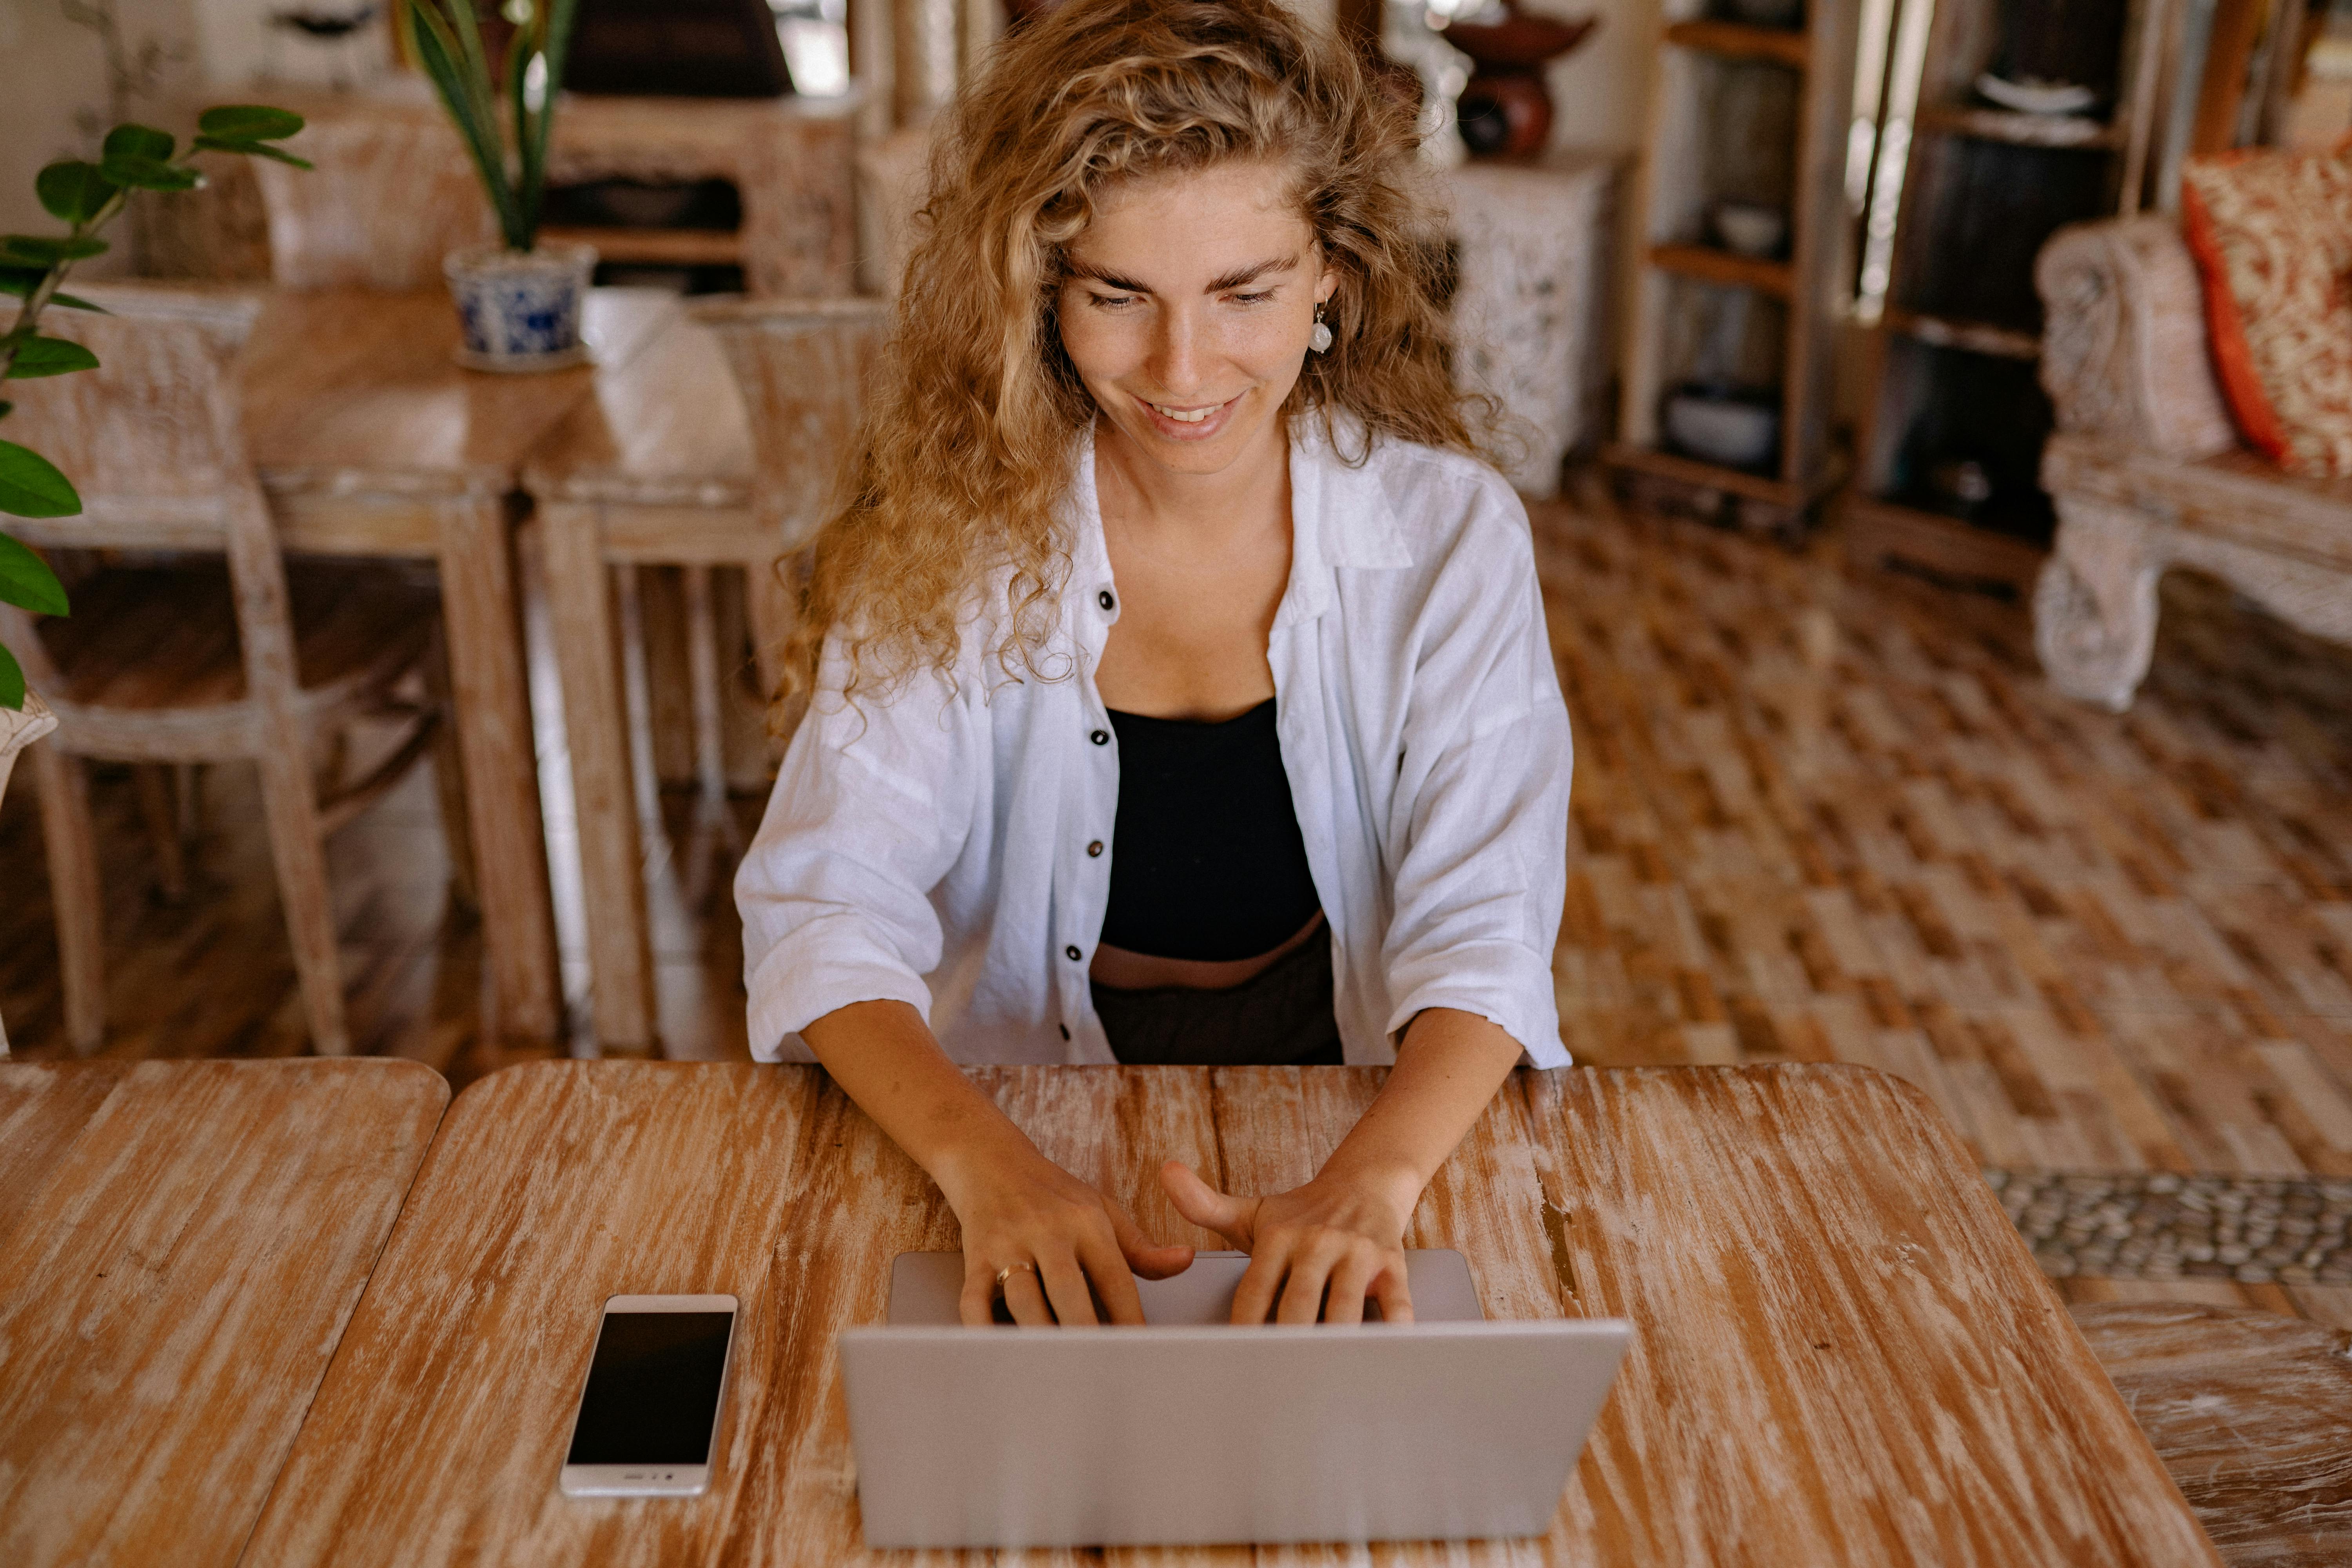 photo of woman using silver laptop while smiling